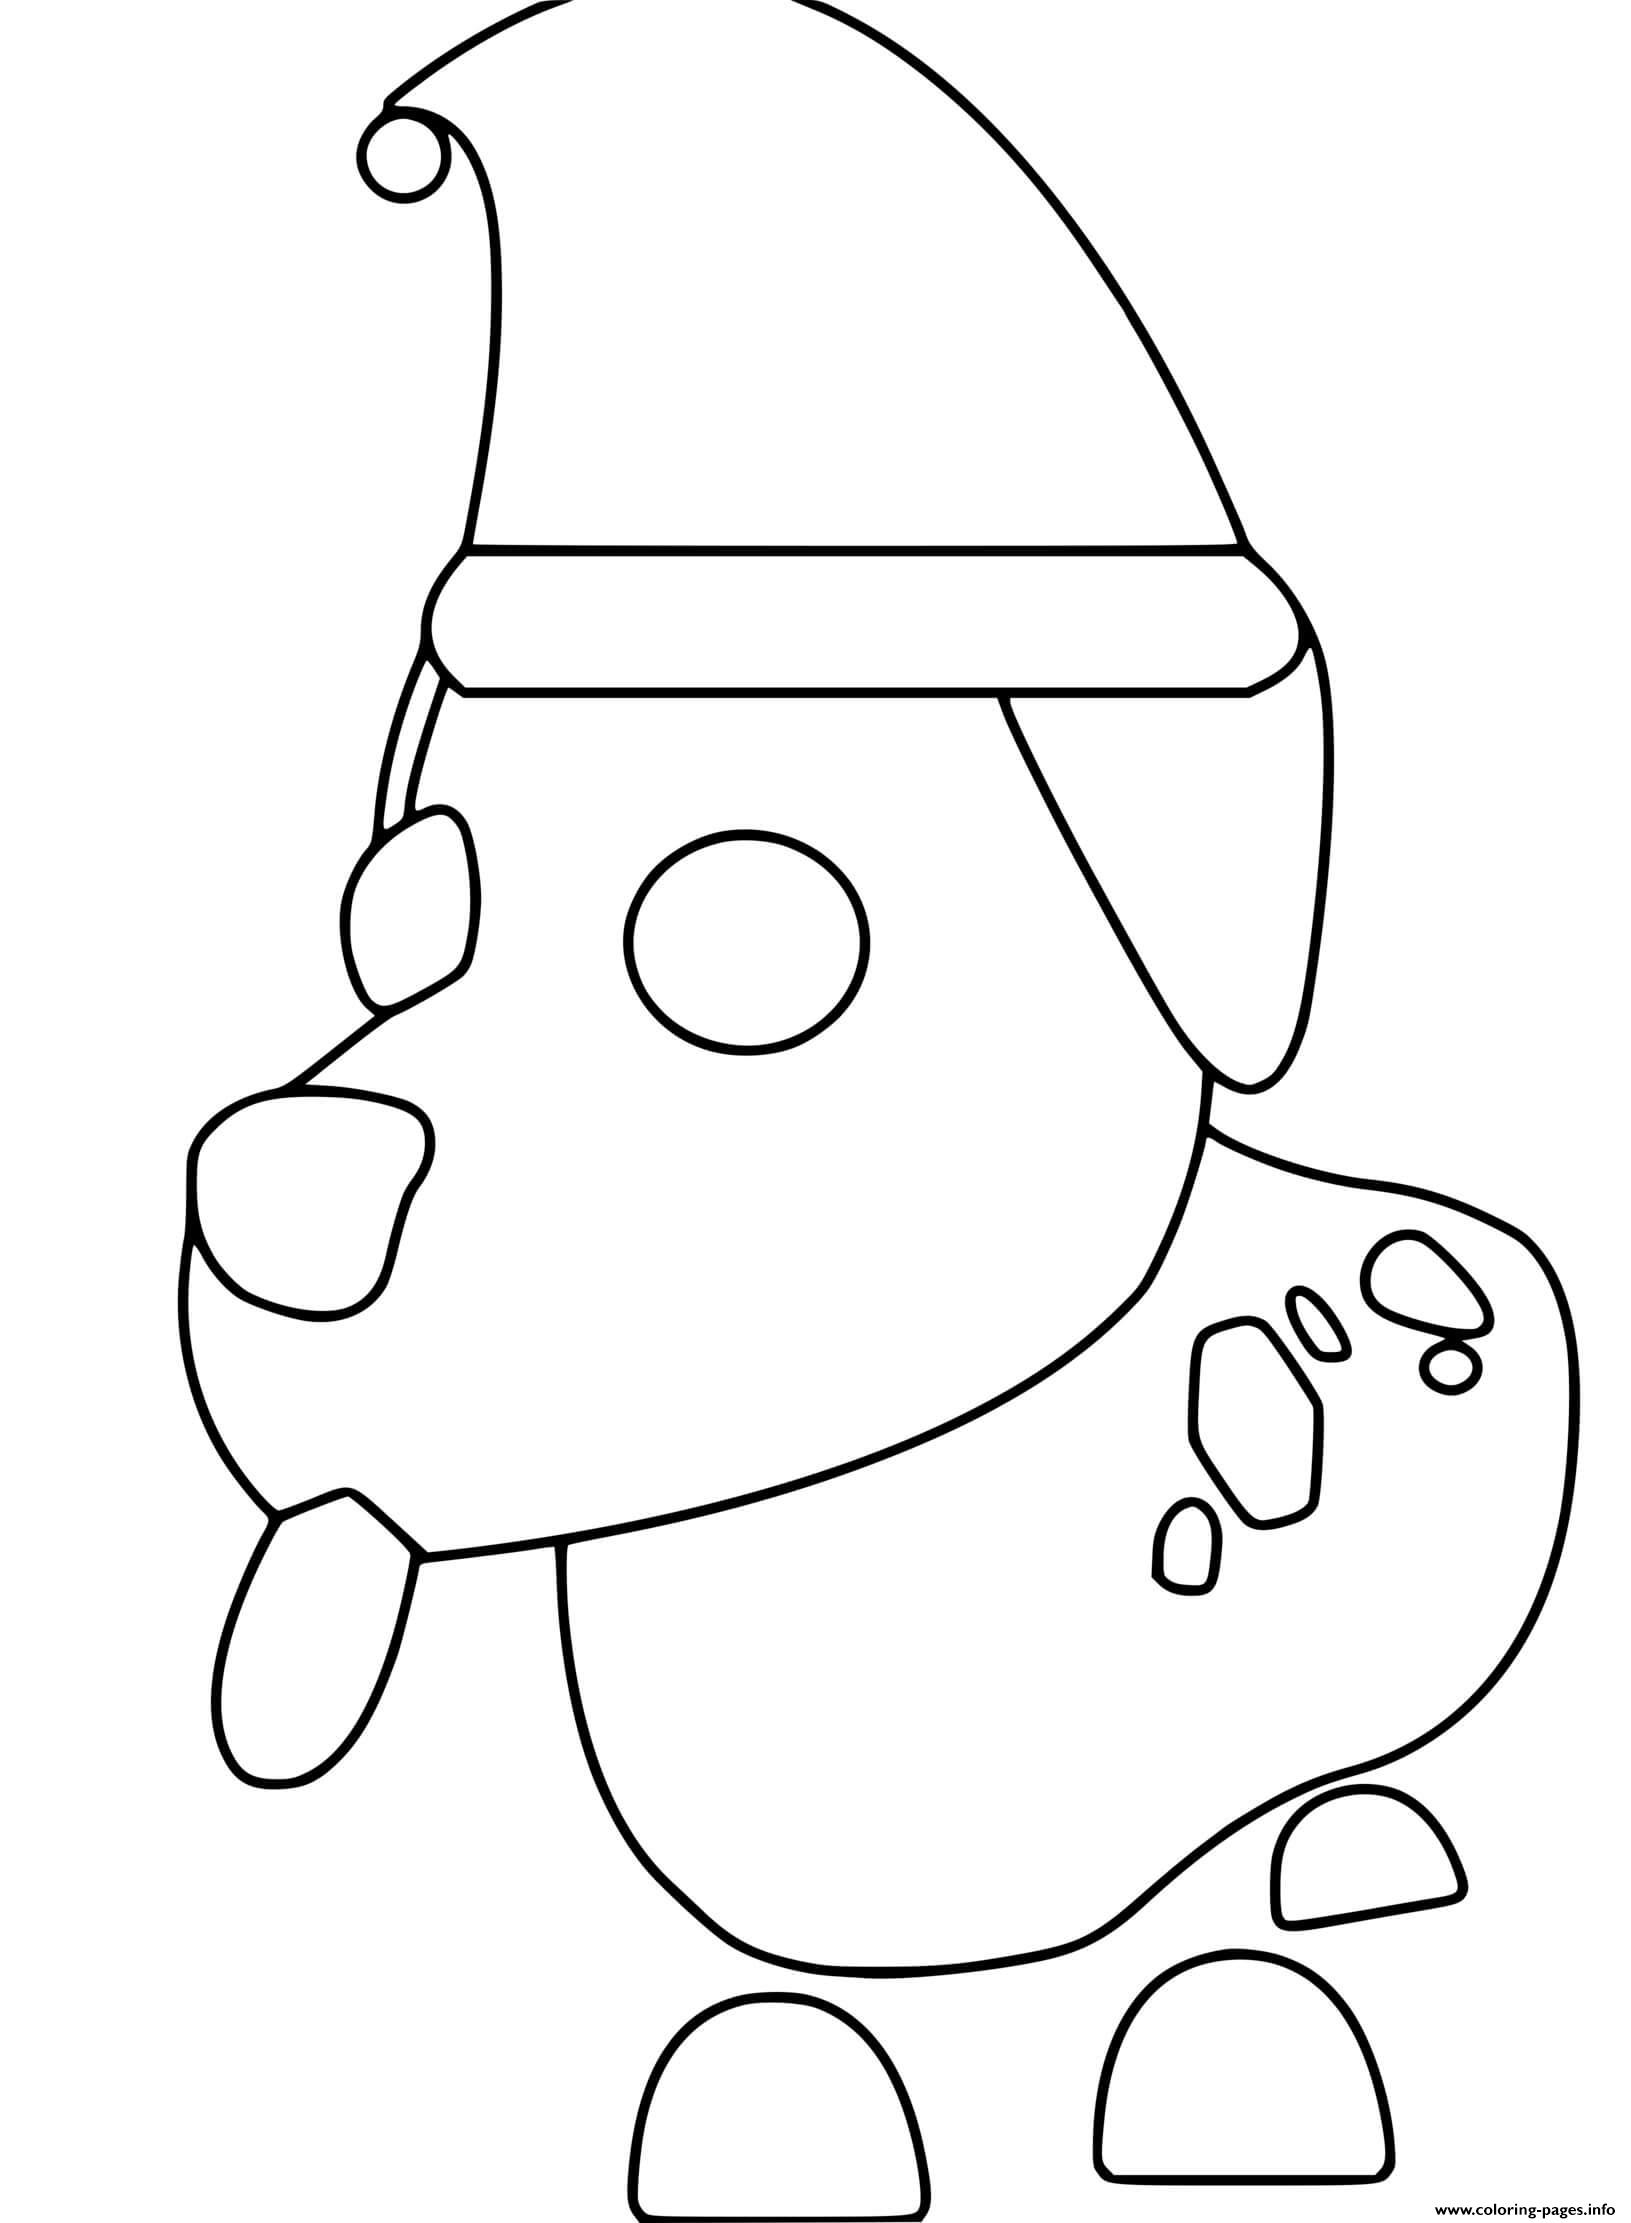 Roblox Adopt Me Christmas Dog Coloring Pages Printable - roblox coloring pages adopt me